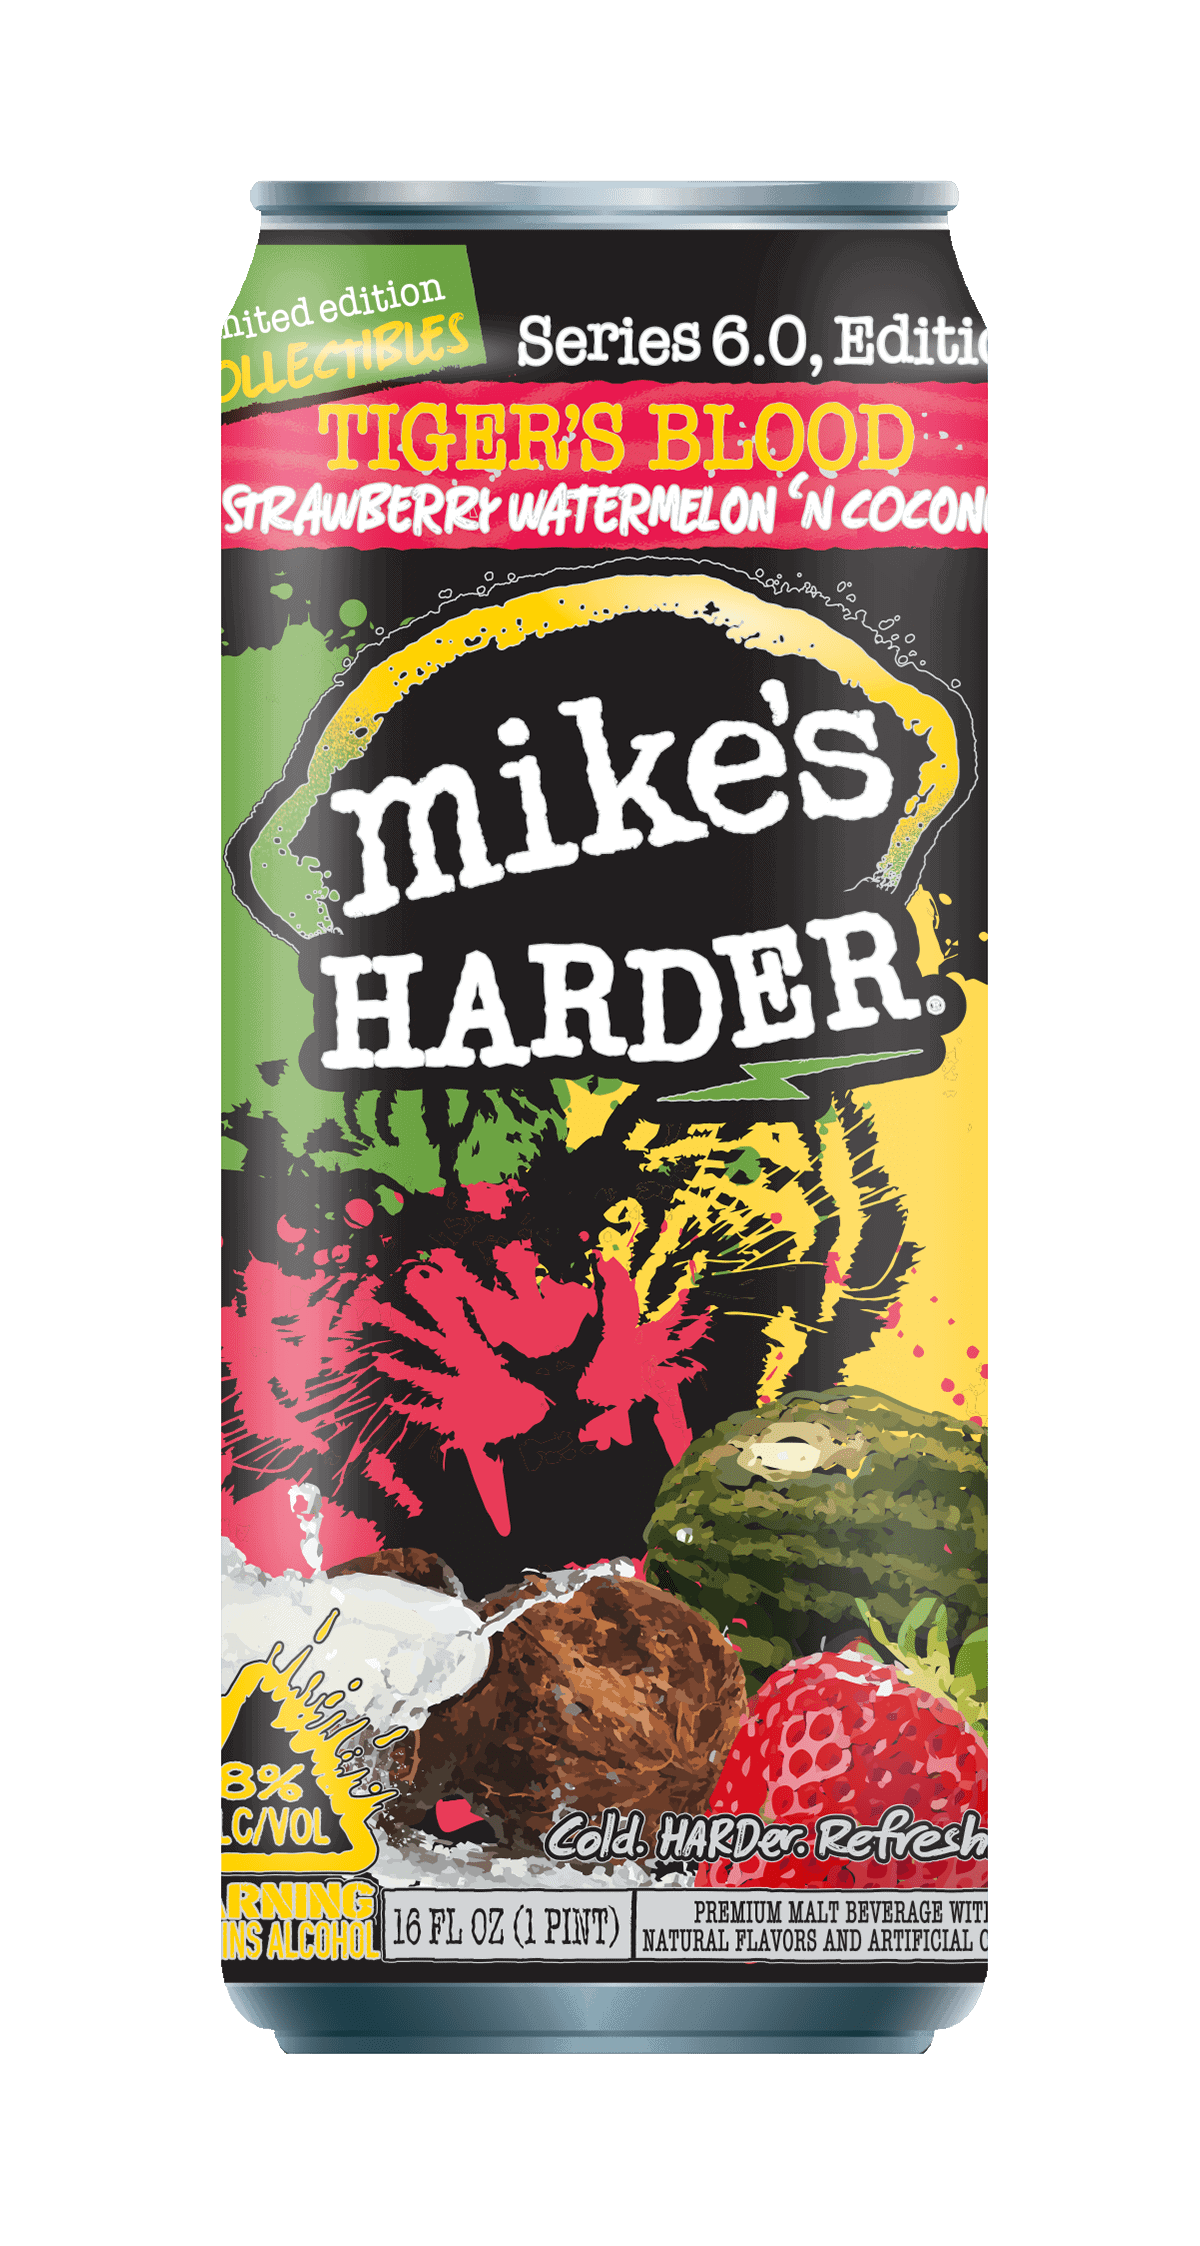 Mikes harder lemonade can